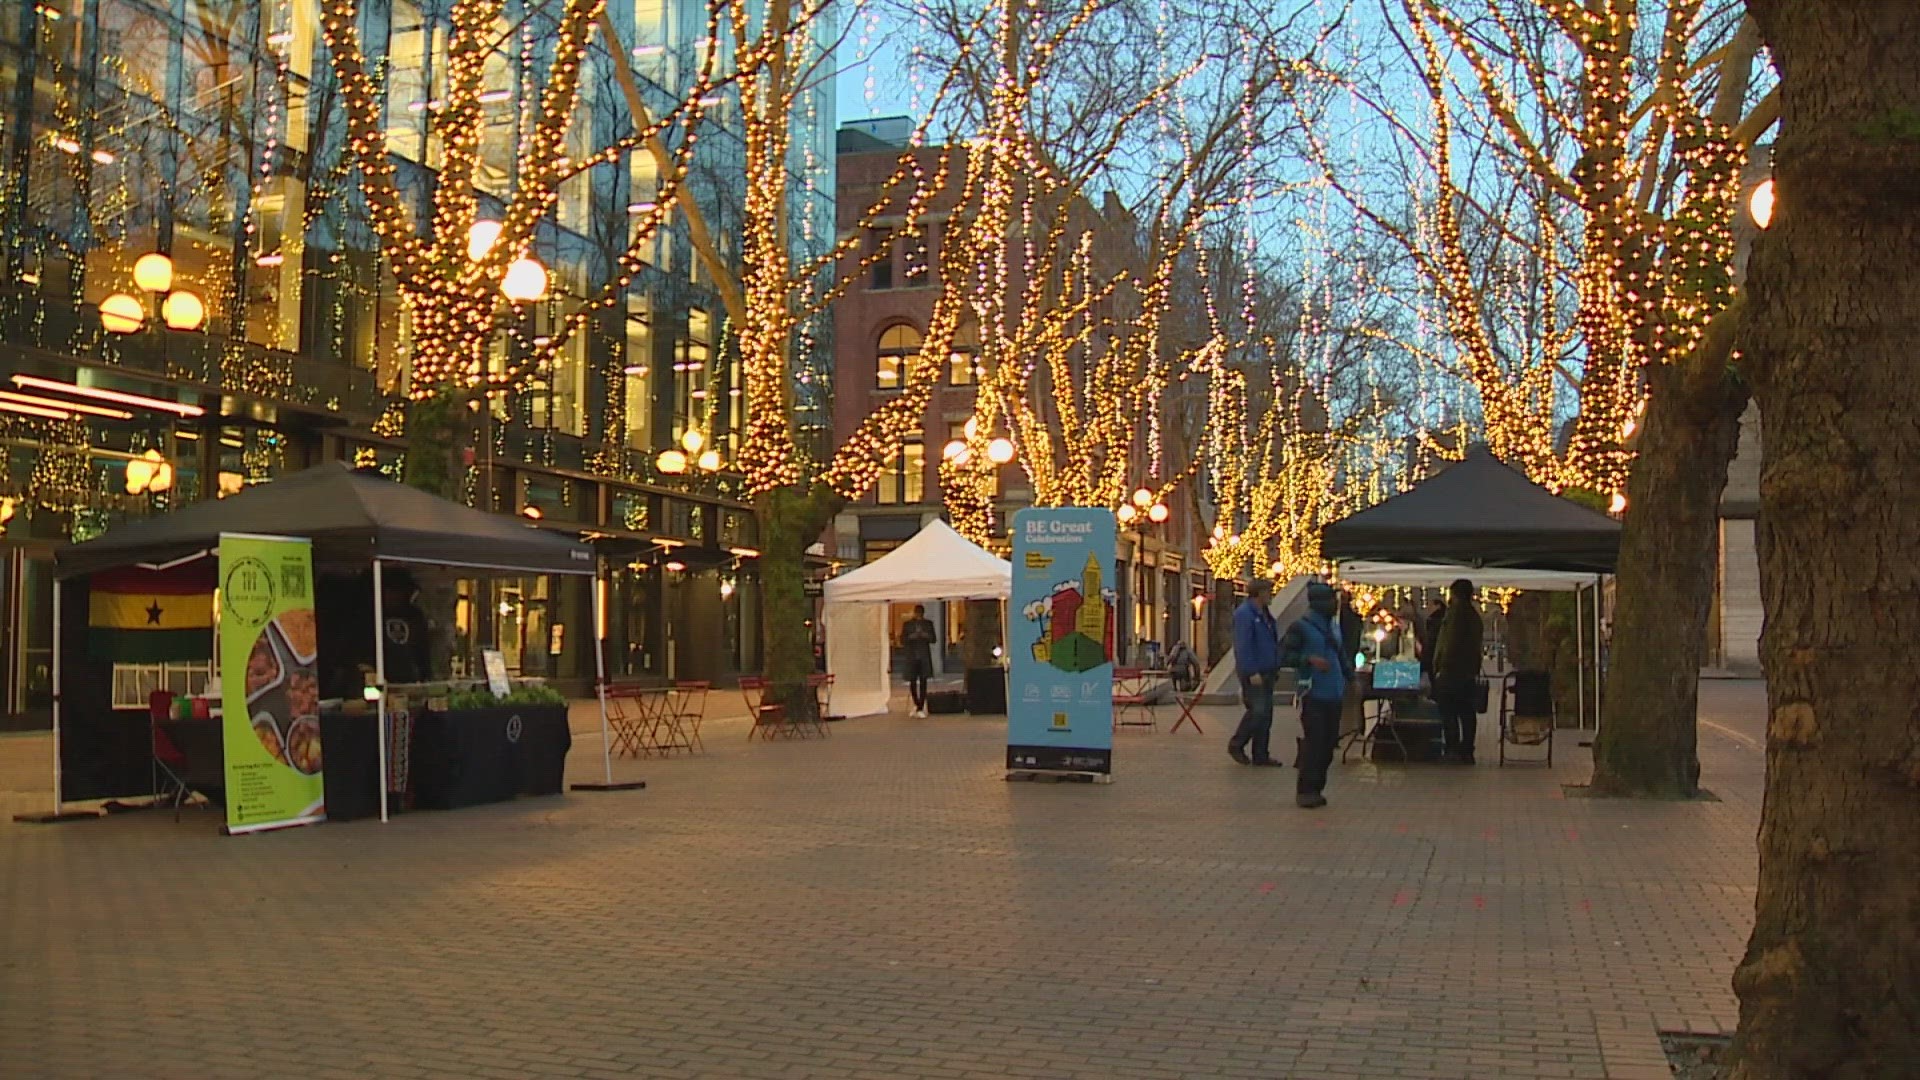 Live music, art and food vendors available in Occidental Square in Seattle’s Pioneer Square neighborhood this weekend.